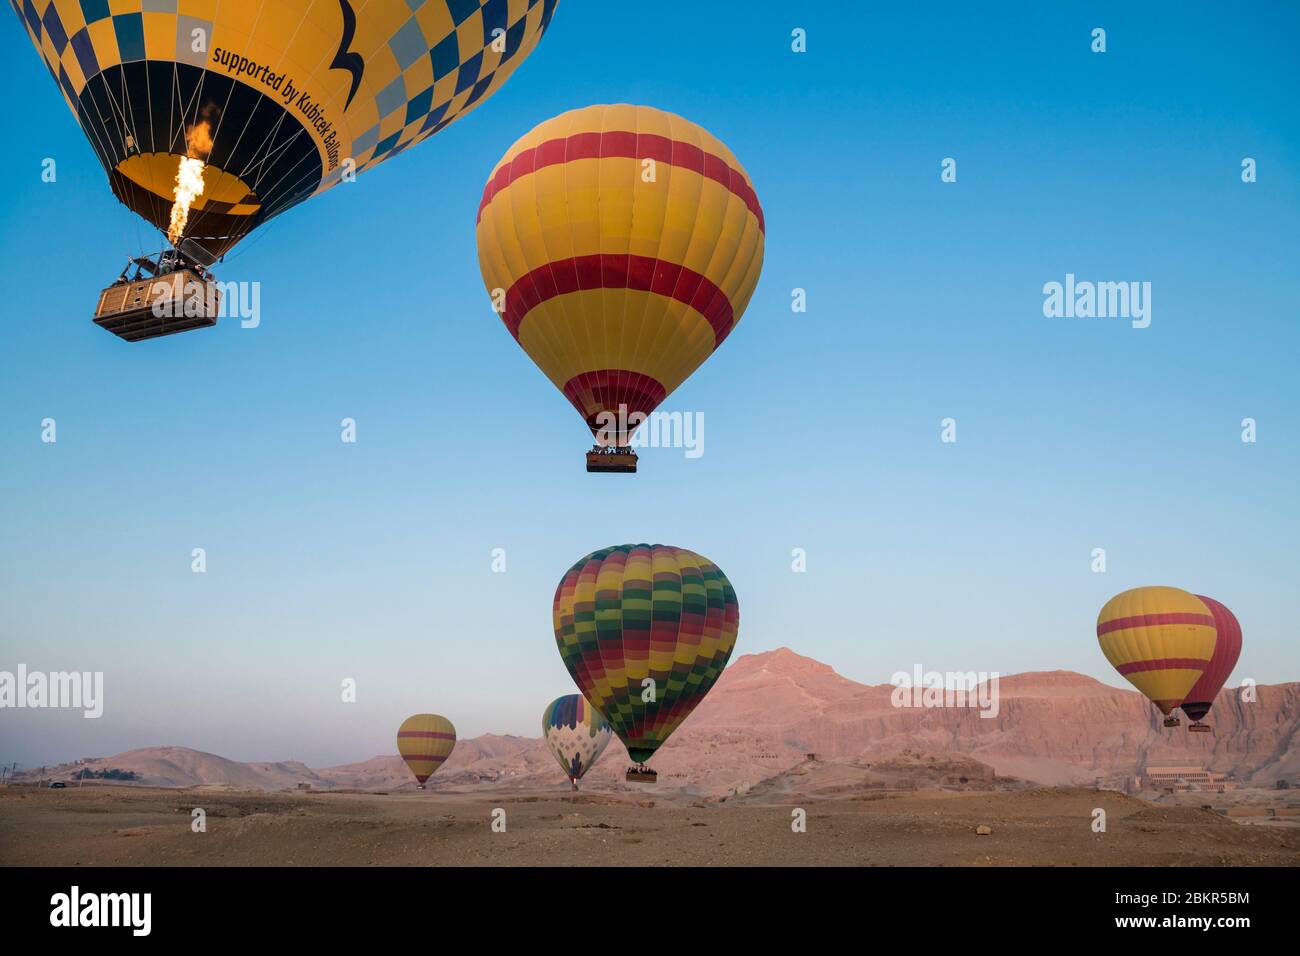 Egypt, Upper Egypt, Nile valley, surroundings of Luxor, west Thebes, Thebes Necropolis listed as World Heritage by UNESCO, balloons flight Stock Photo